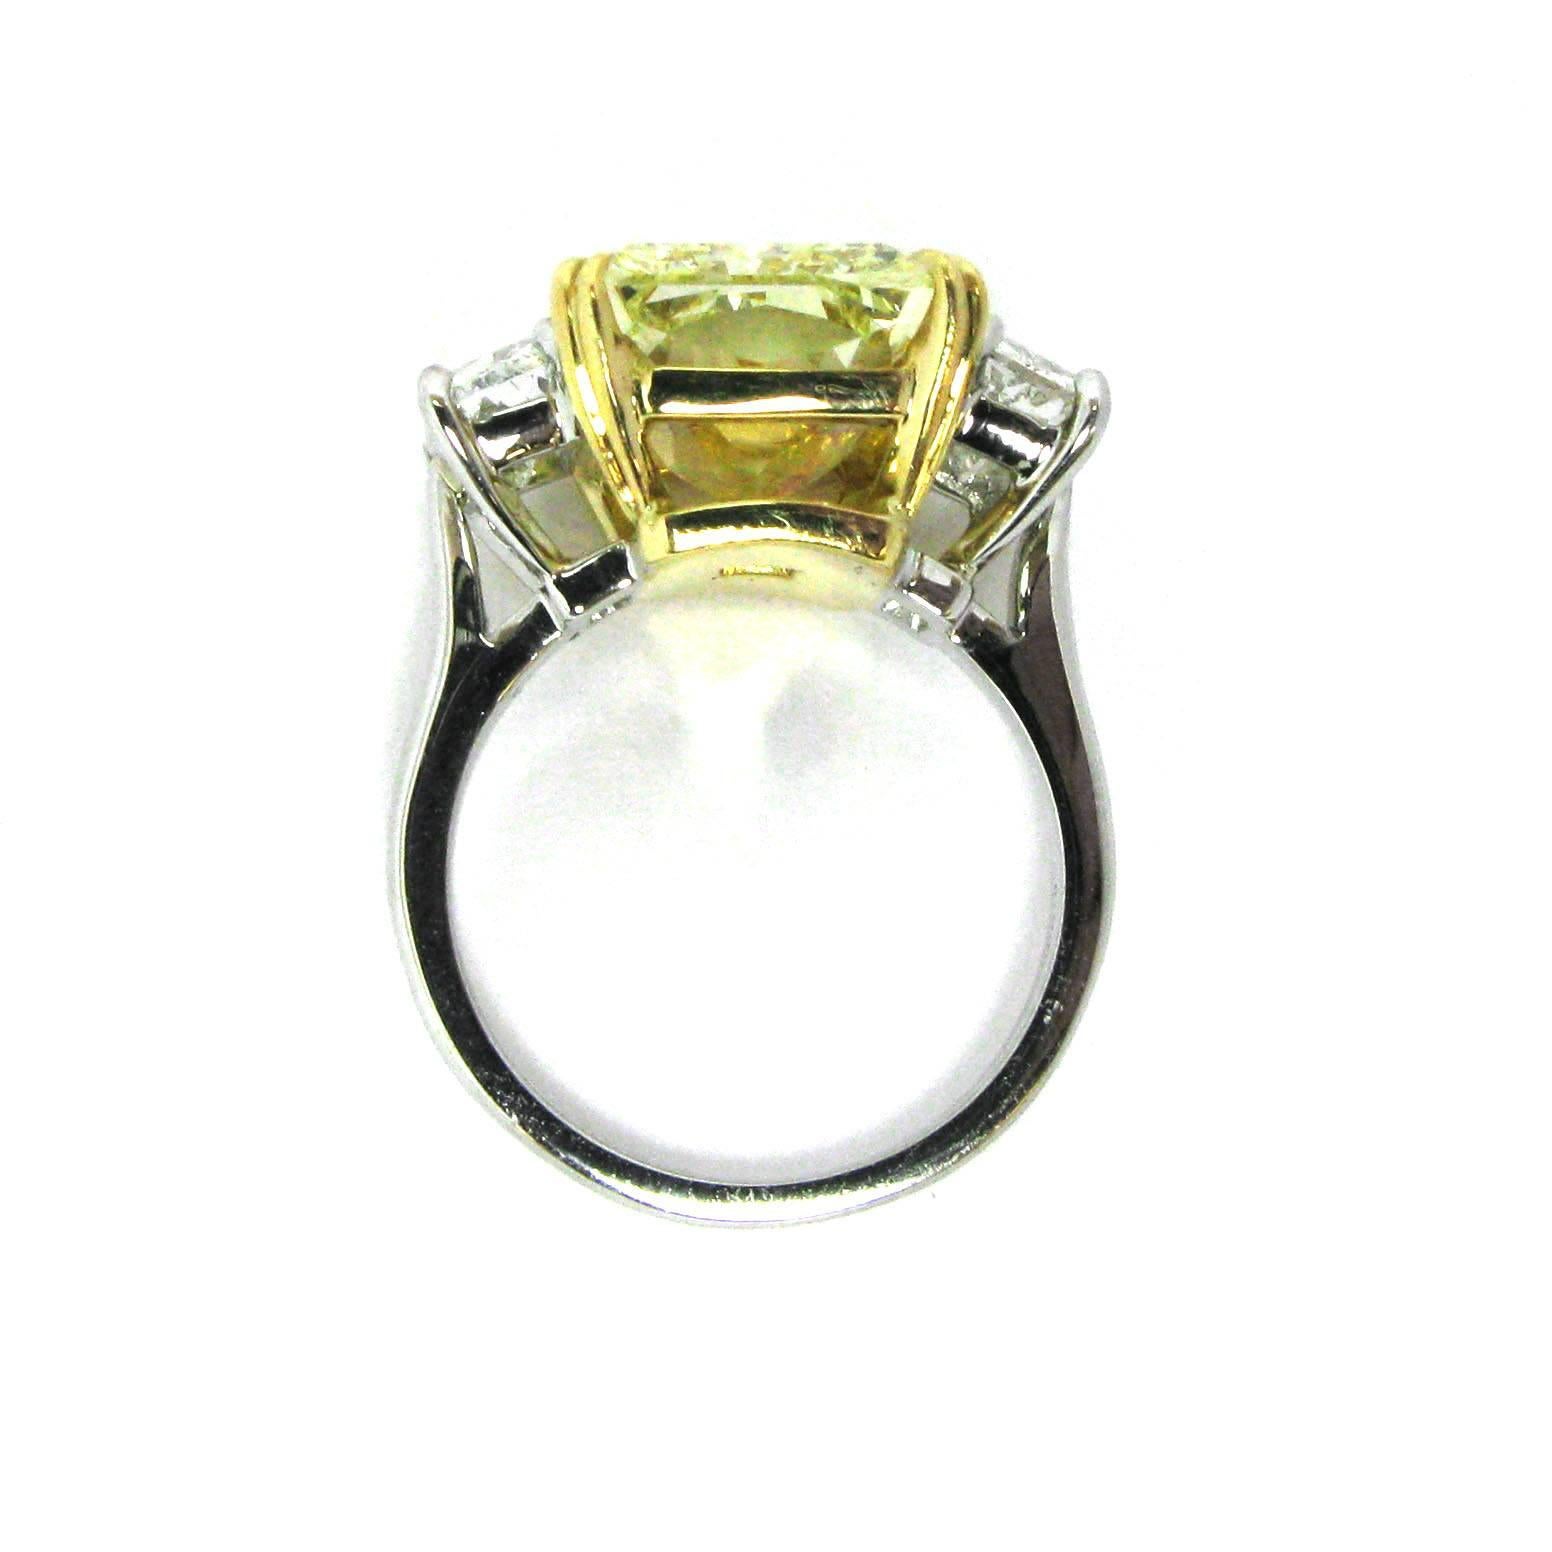 J. Birnbach 11.98 Carats Total Fancy GIA Yellow and White Diamonds Gold Ring  1